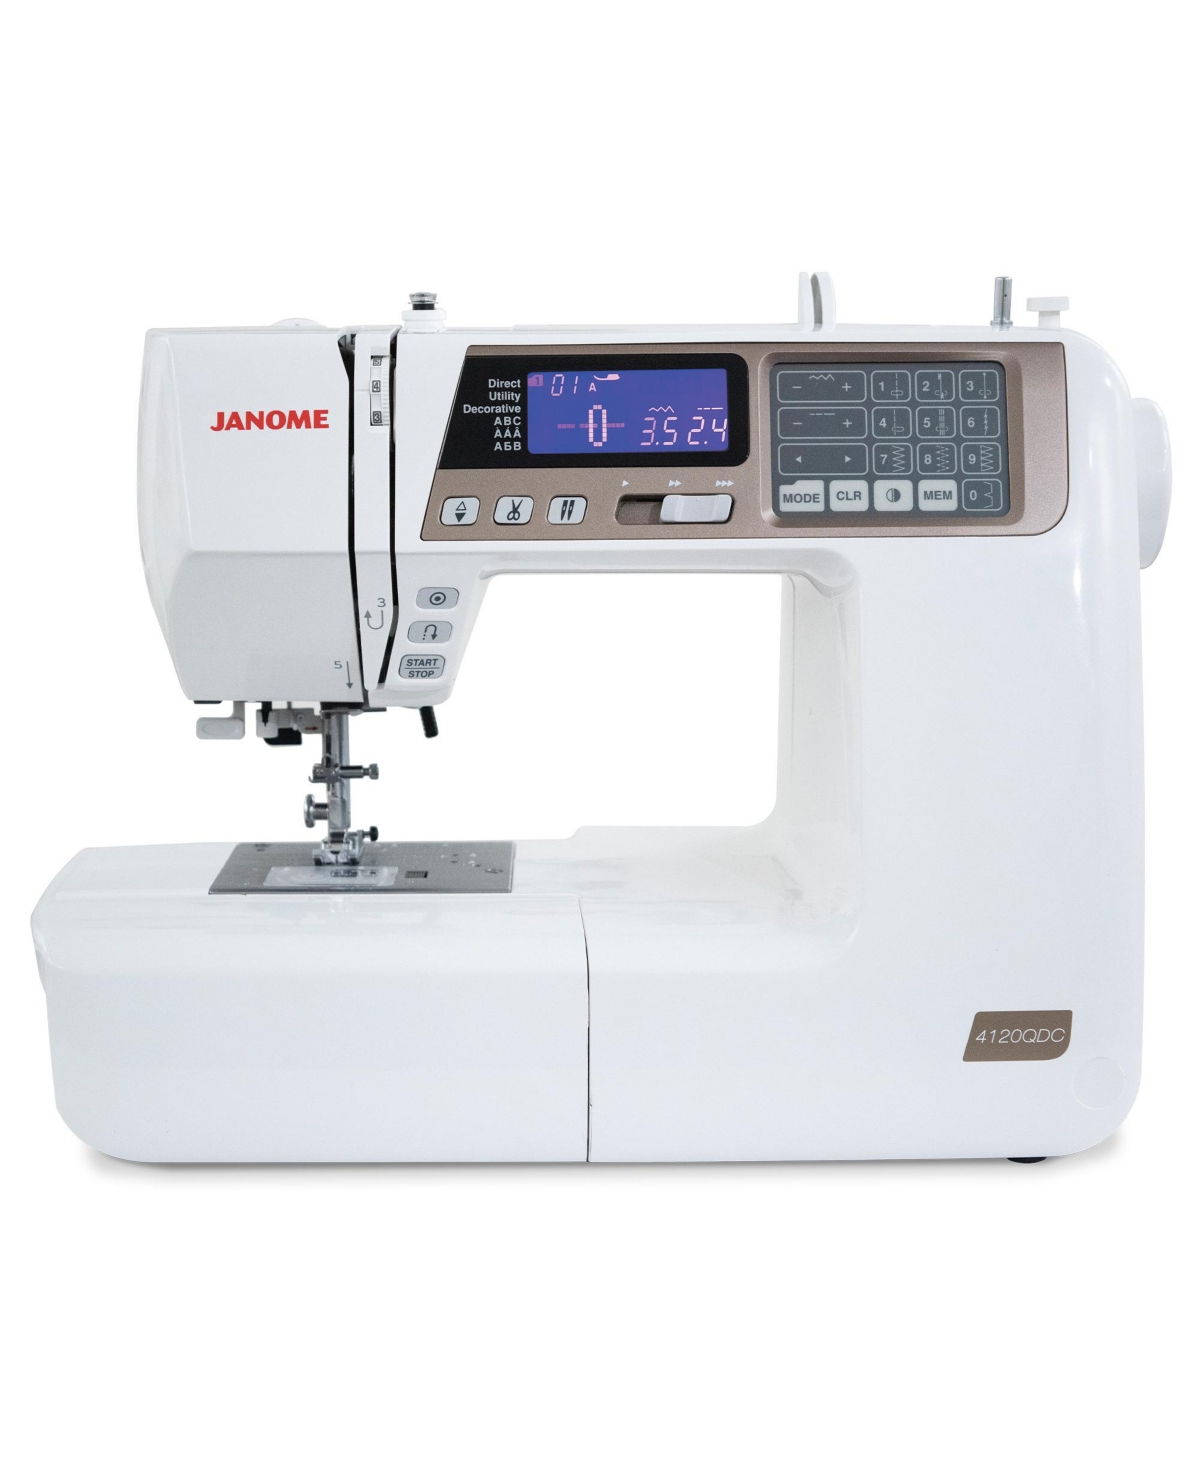 4120QDC-t Computerized Sewing and Quilting Sewing Machine - White